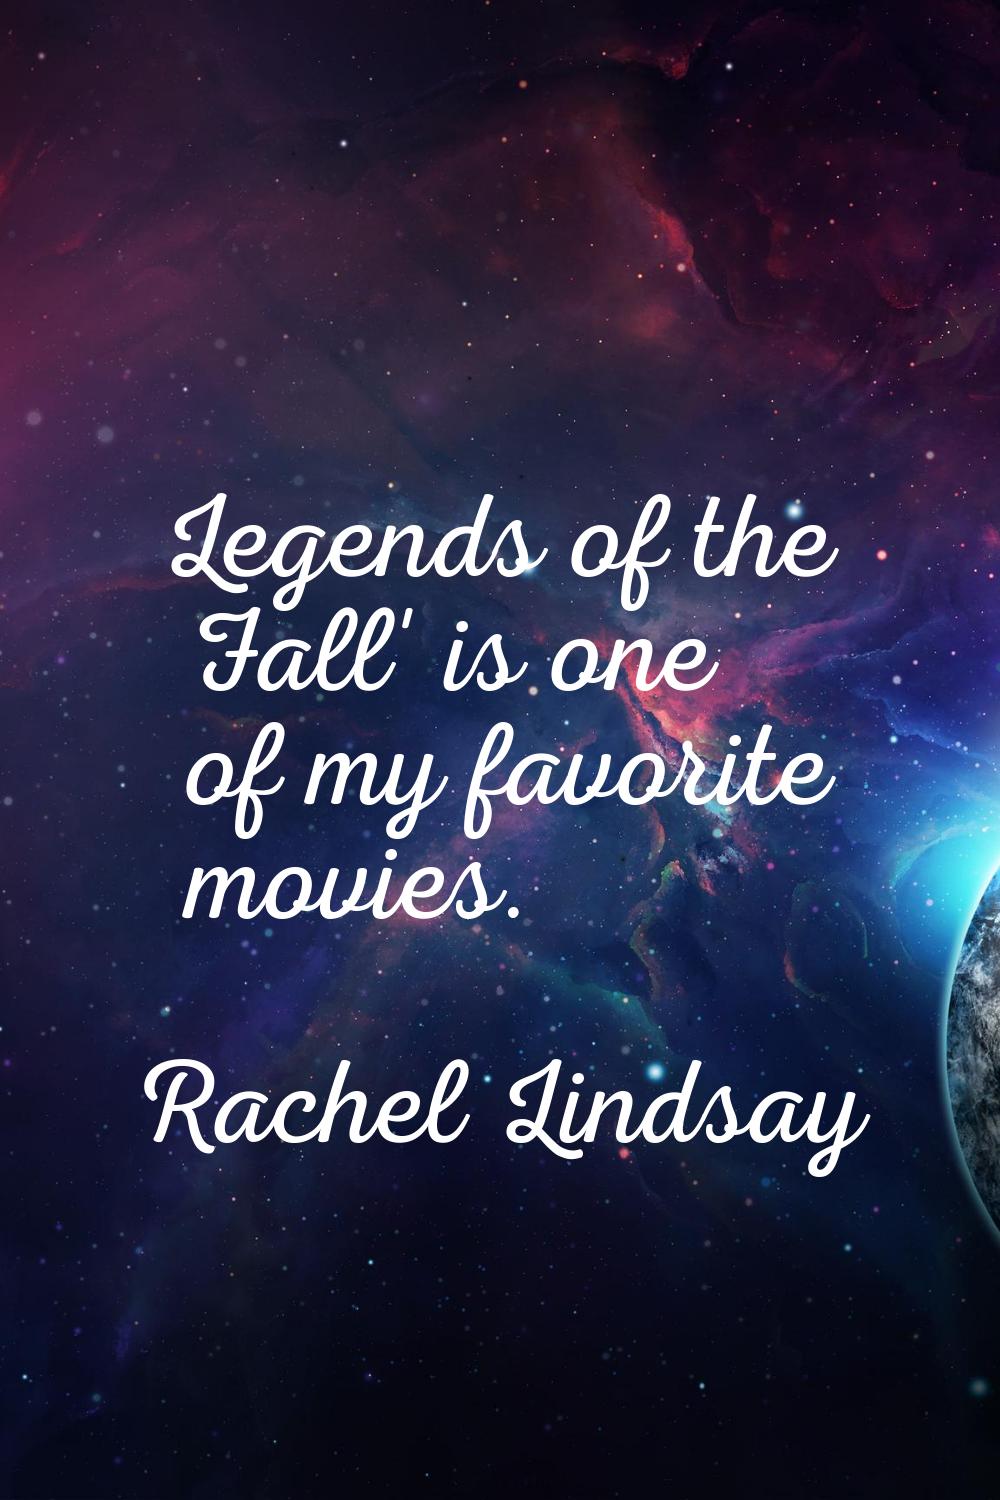 Legends of the Fall' is one of my favorite movies.